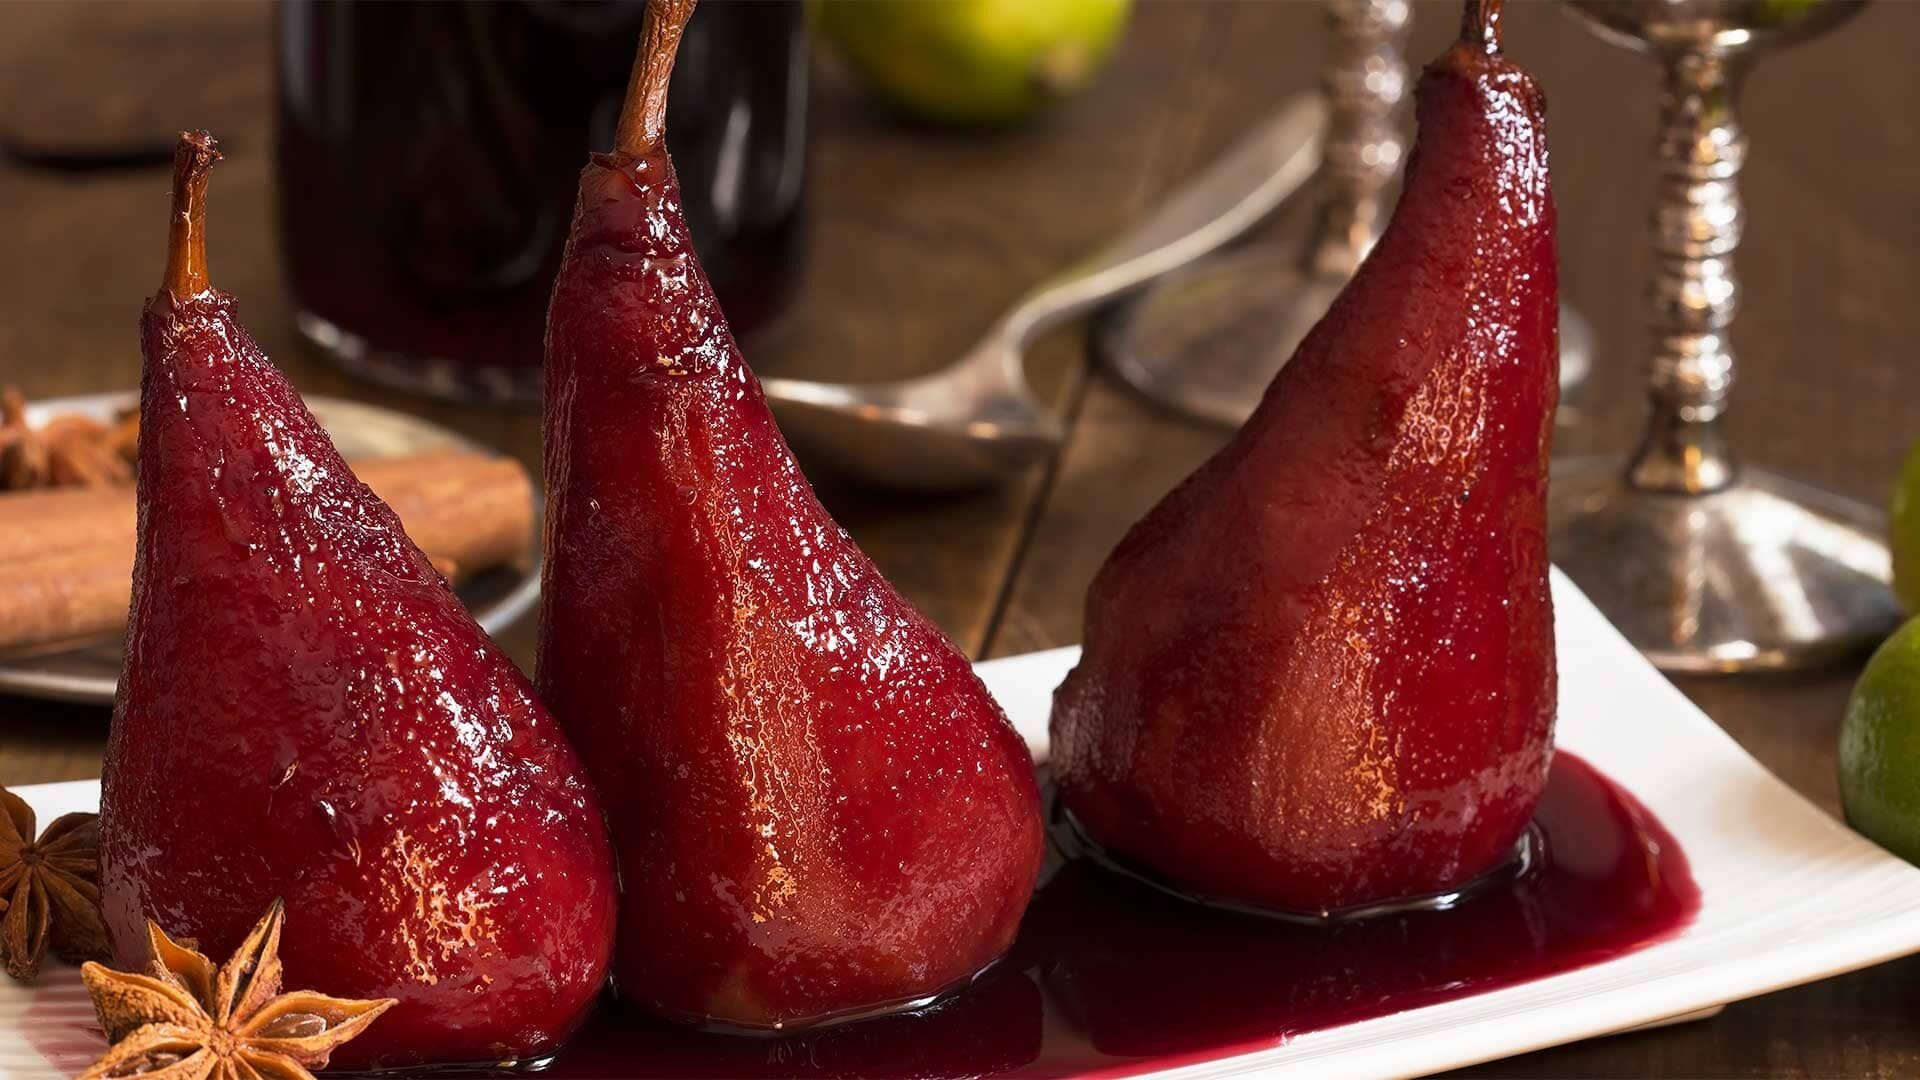 pears_poached_red_wine_1920x1080-1